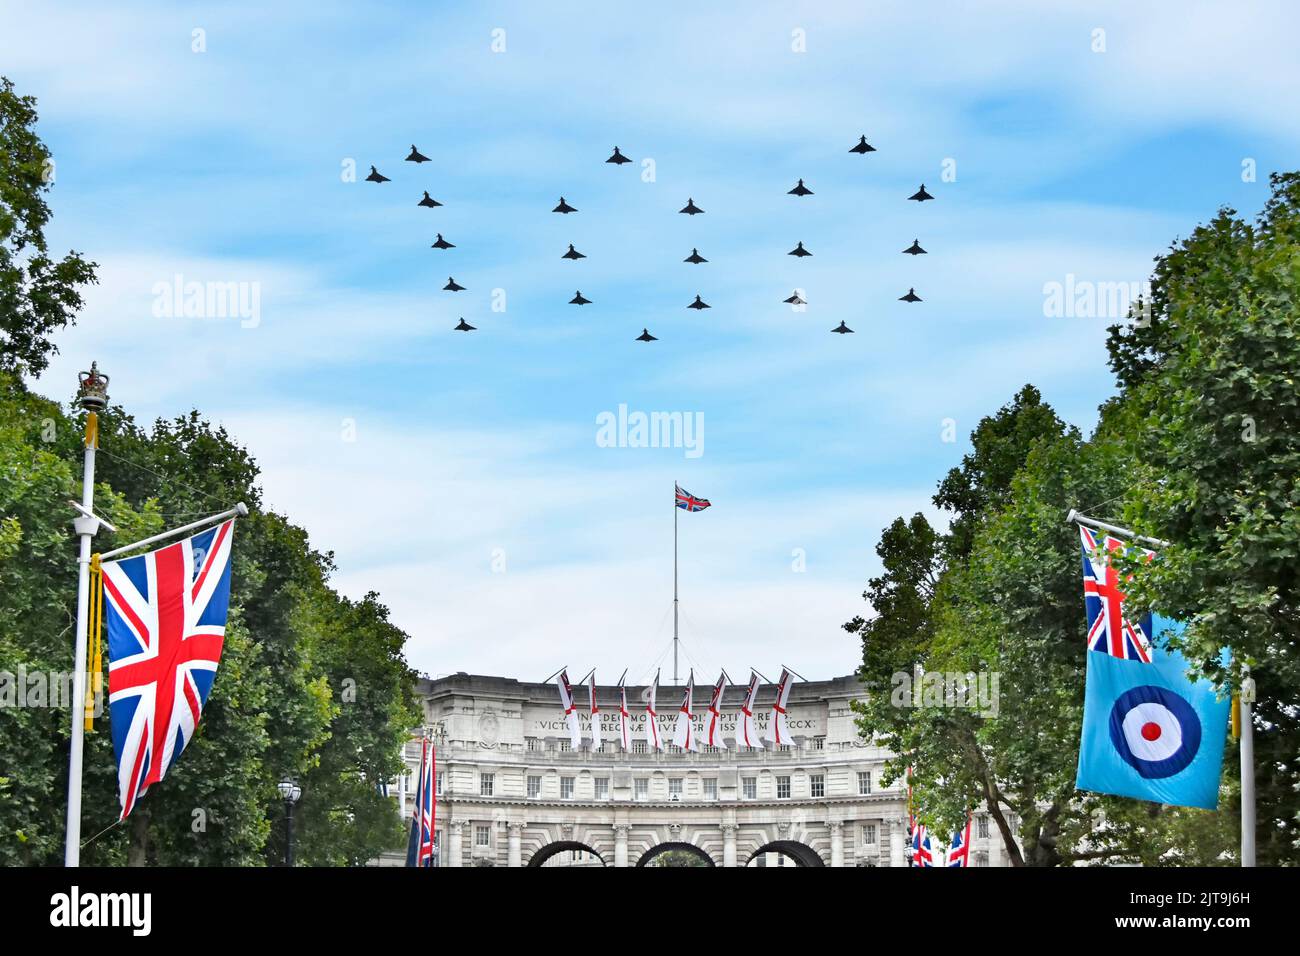 22 Eurofighter Typhoon FGR4 fighter plane RAF ensign centenary flypast over The Mall London flying in 100 figure formation Union Jack flag England UK Stock Photo